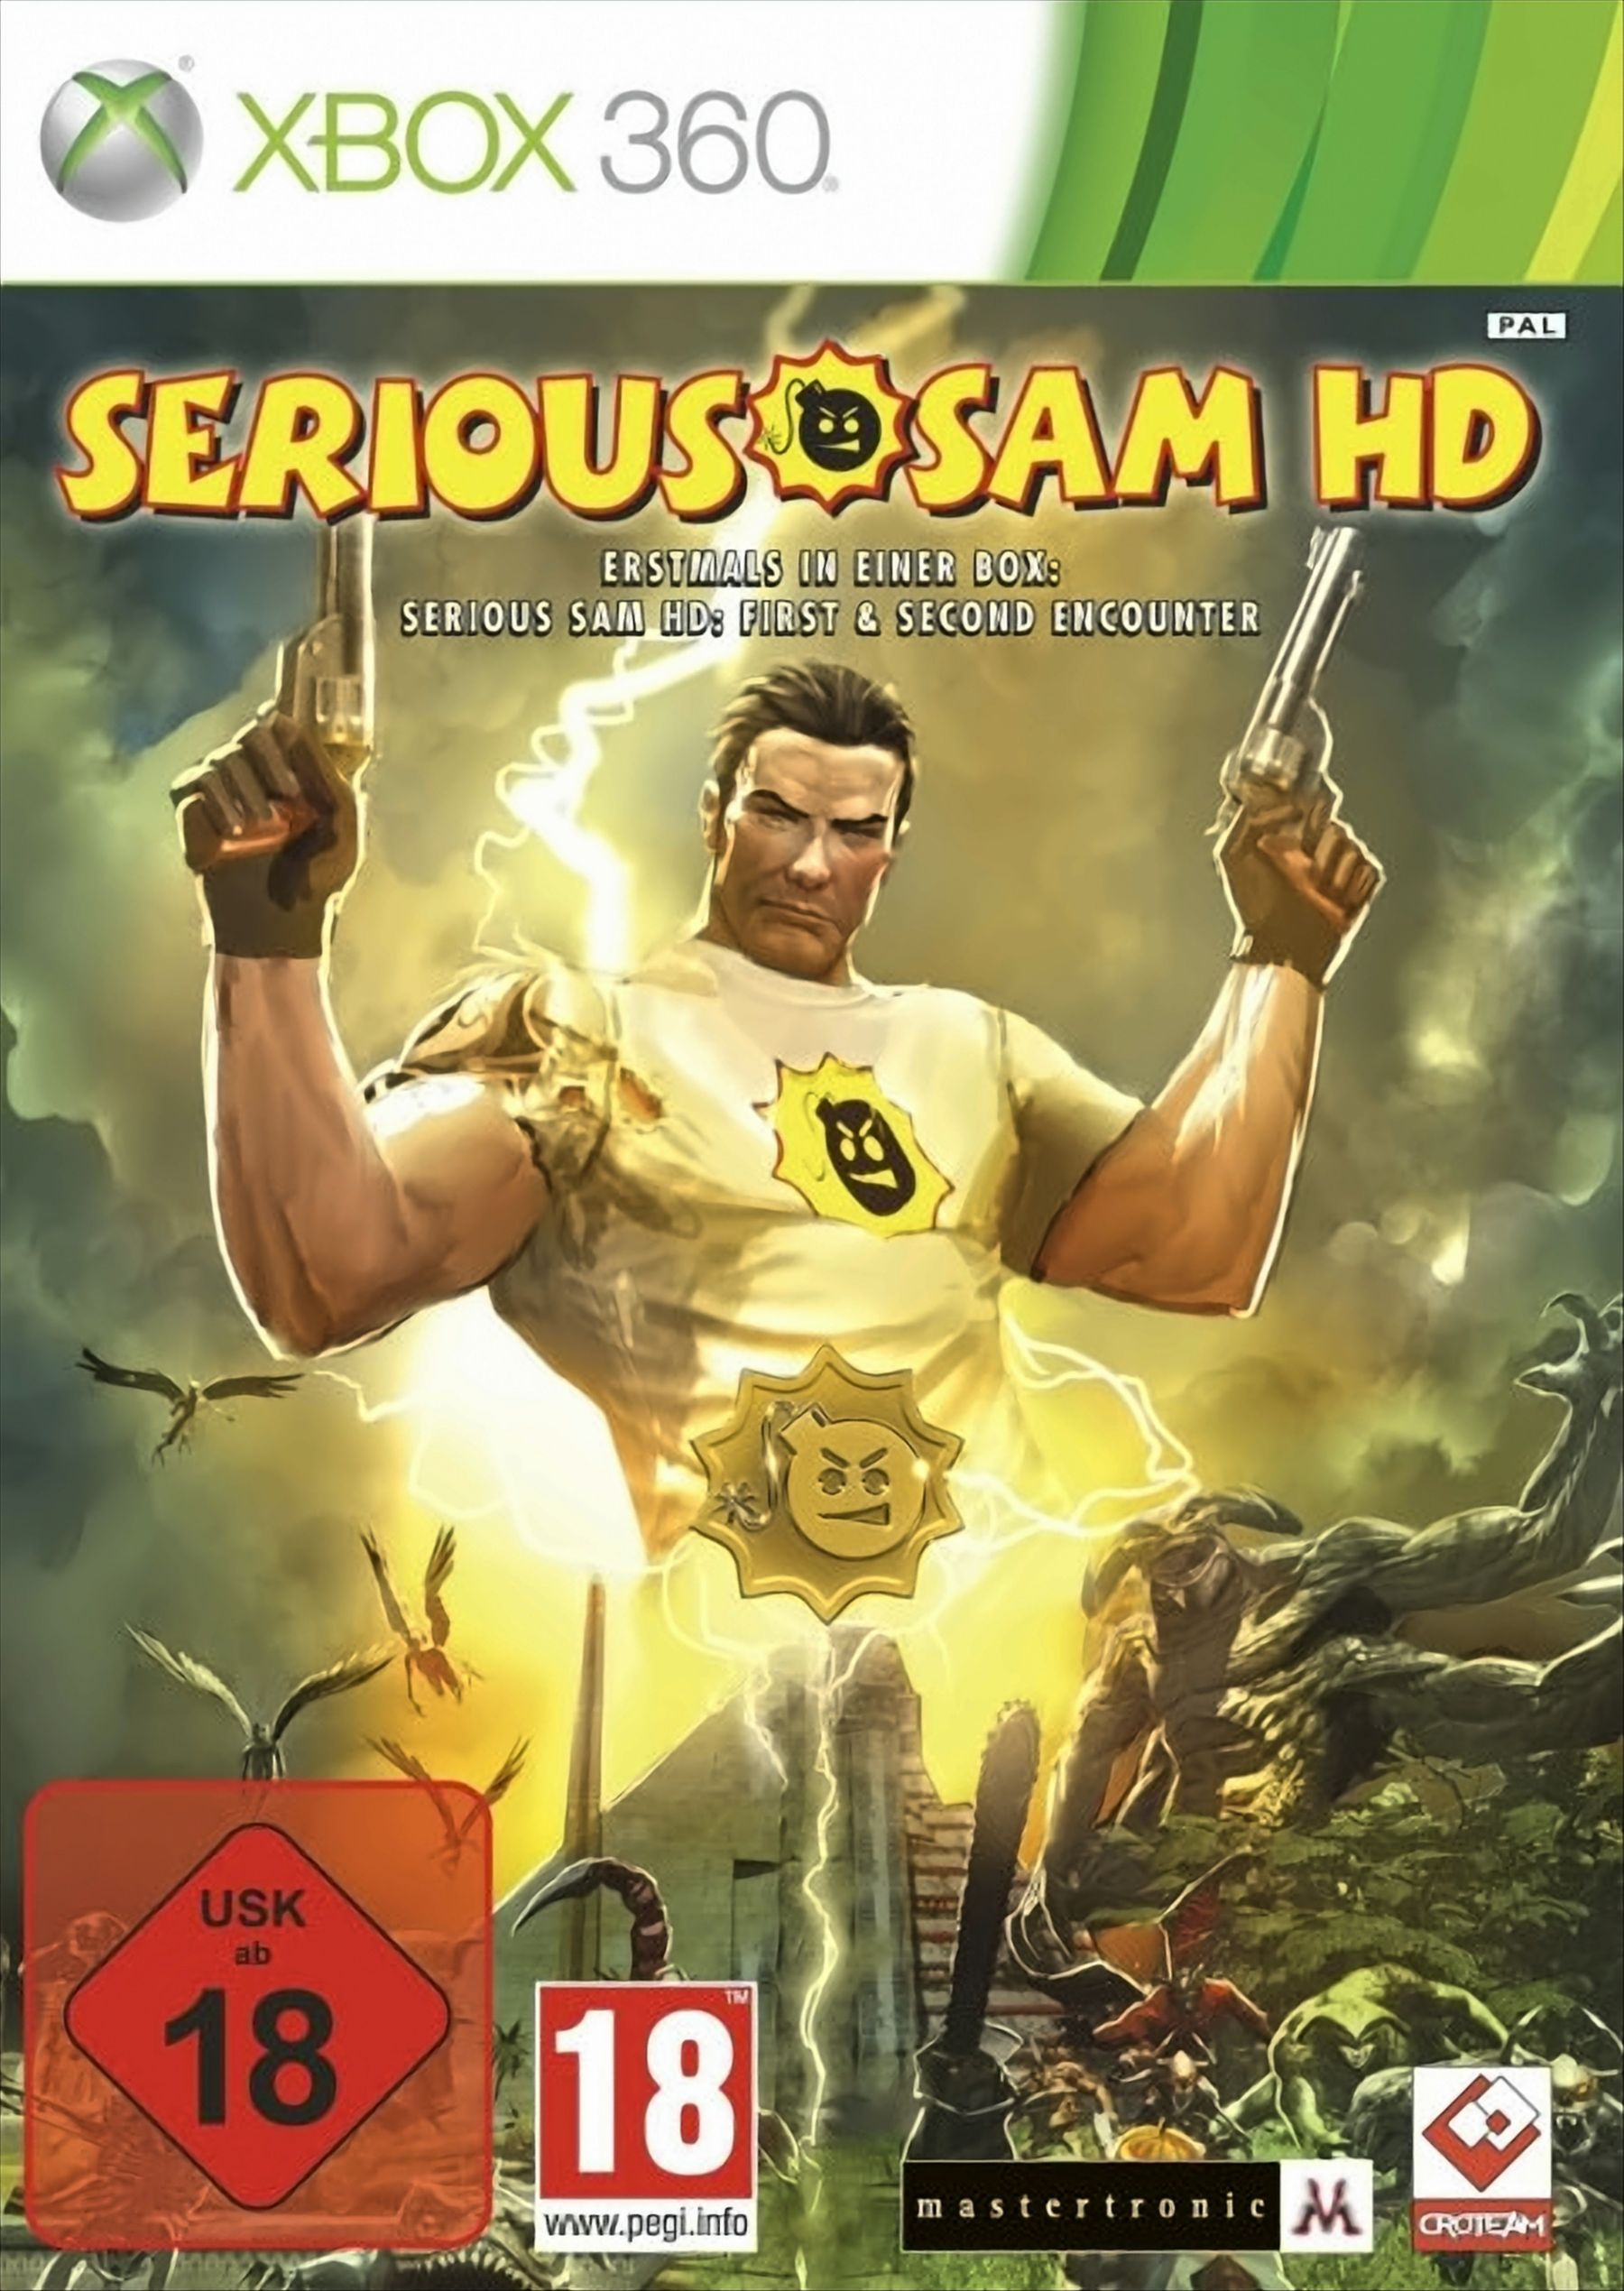 Encounters HD And Serious First [Xbox 360] - - Second The Sam